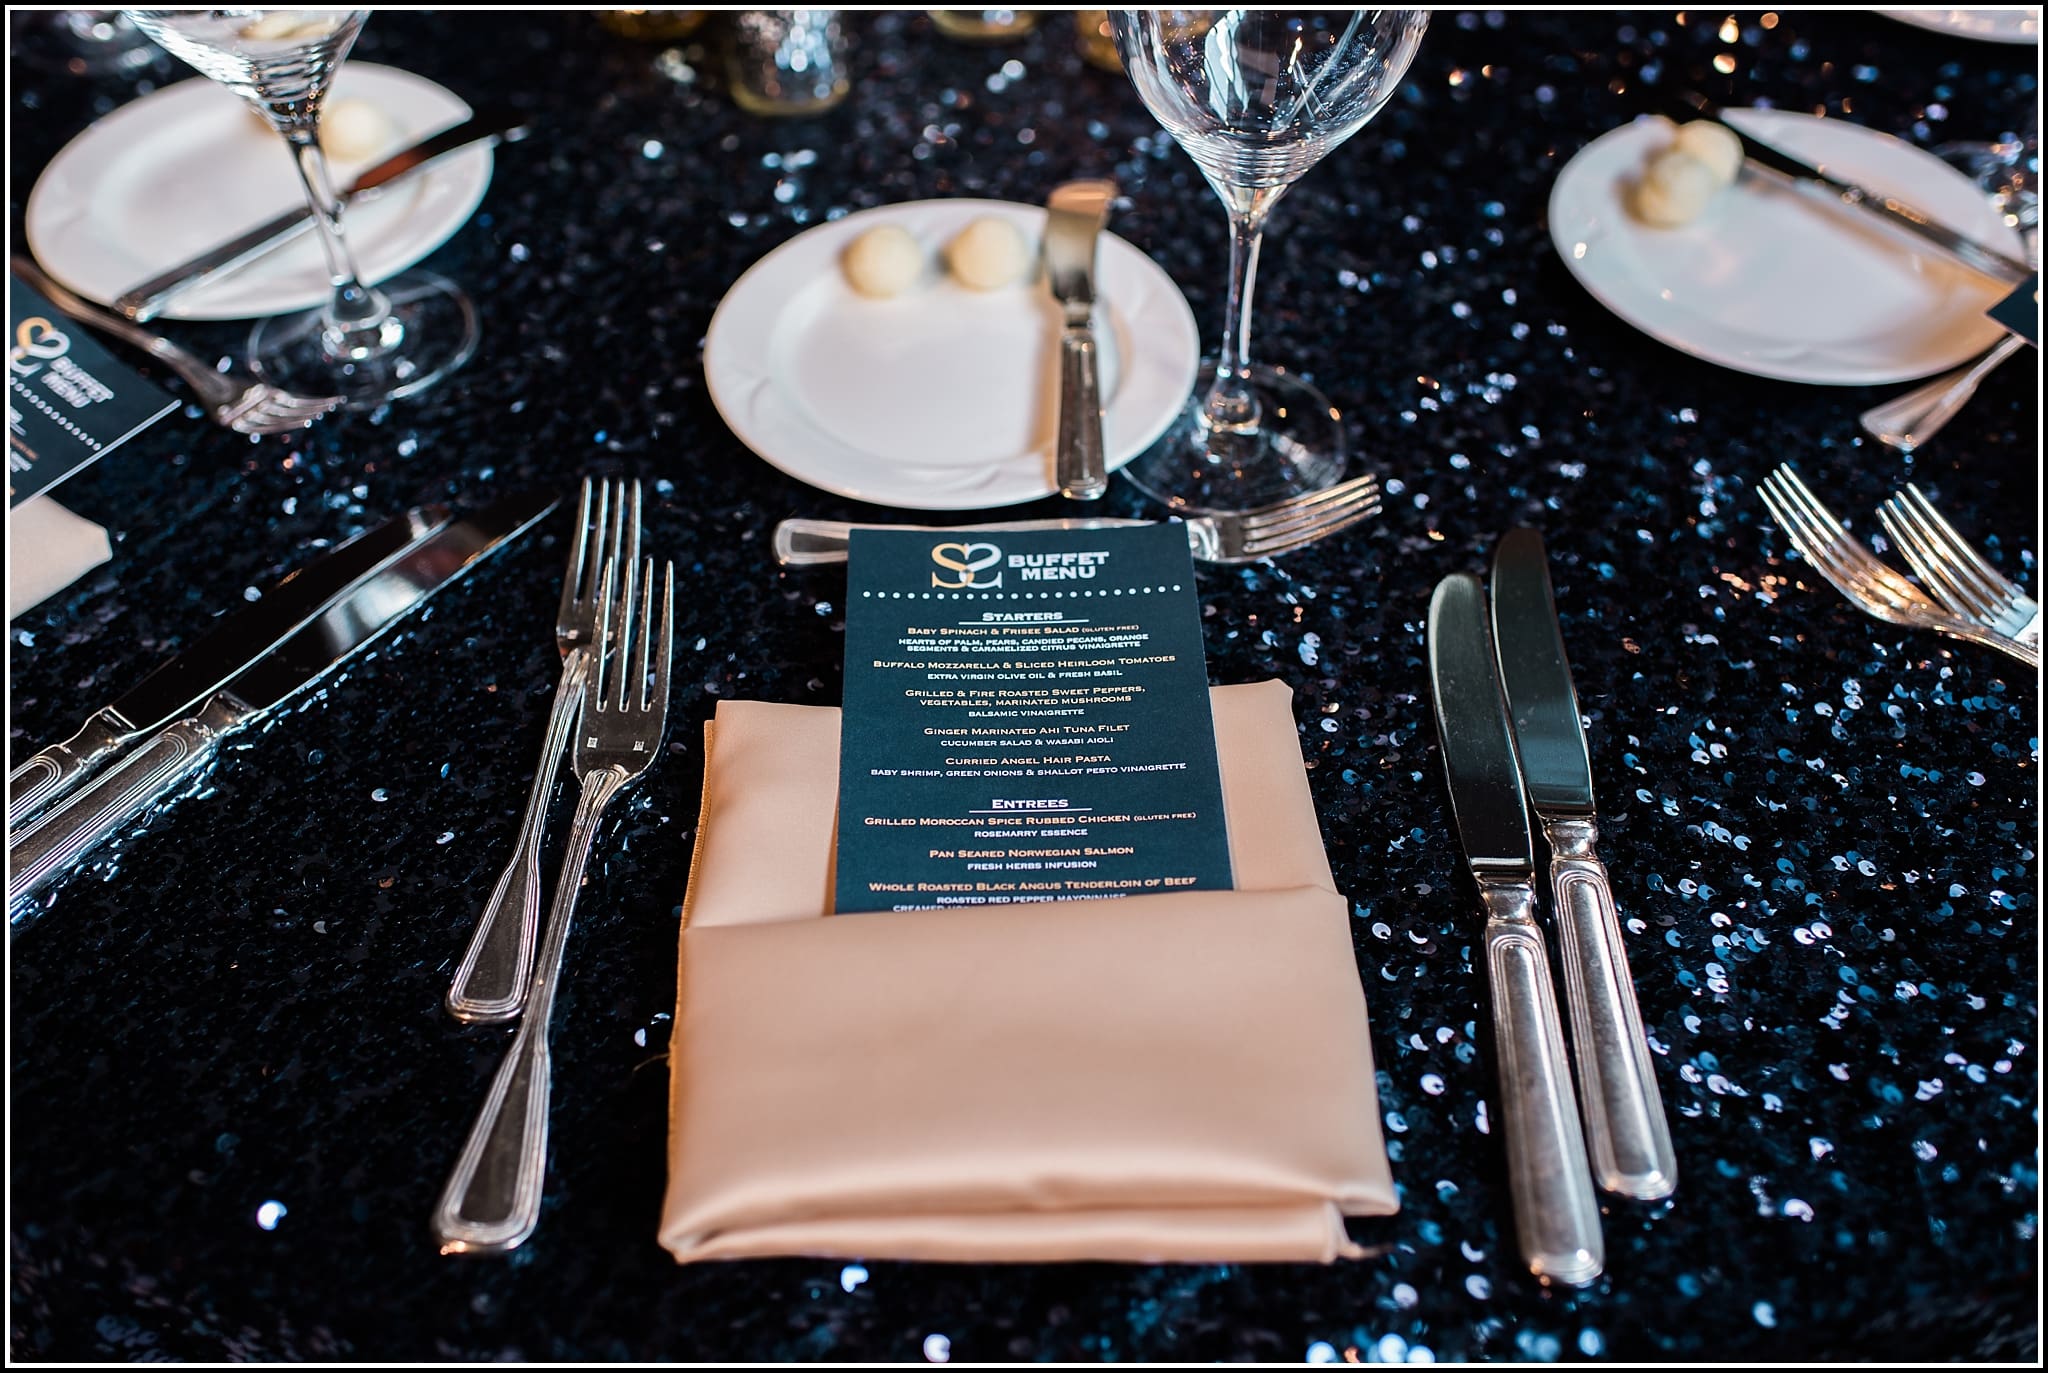  favorite wedding images 2016, wedding photos from 2016, our favorite wedding photos, blue sparkly table clothes, sequin table linens, navy blue sequin wedding reception details